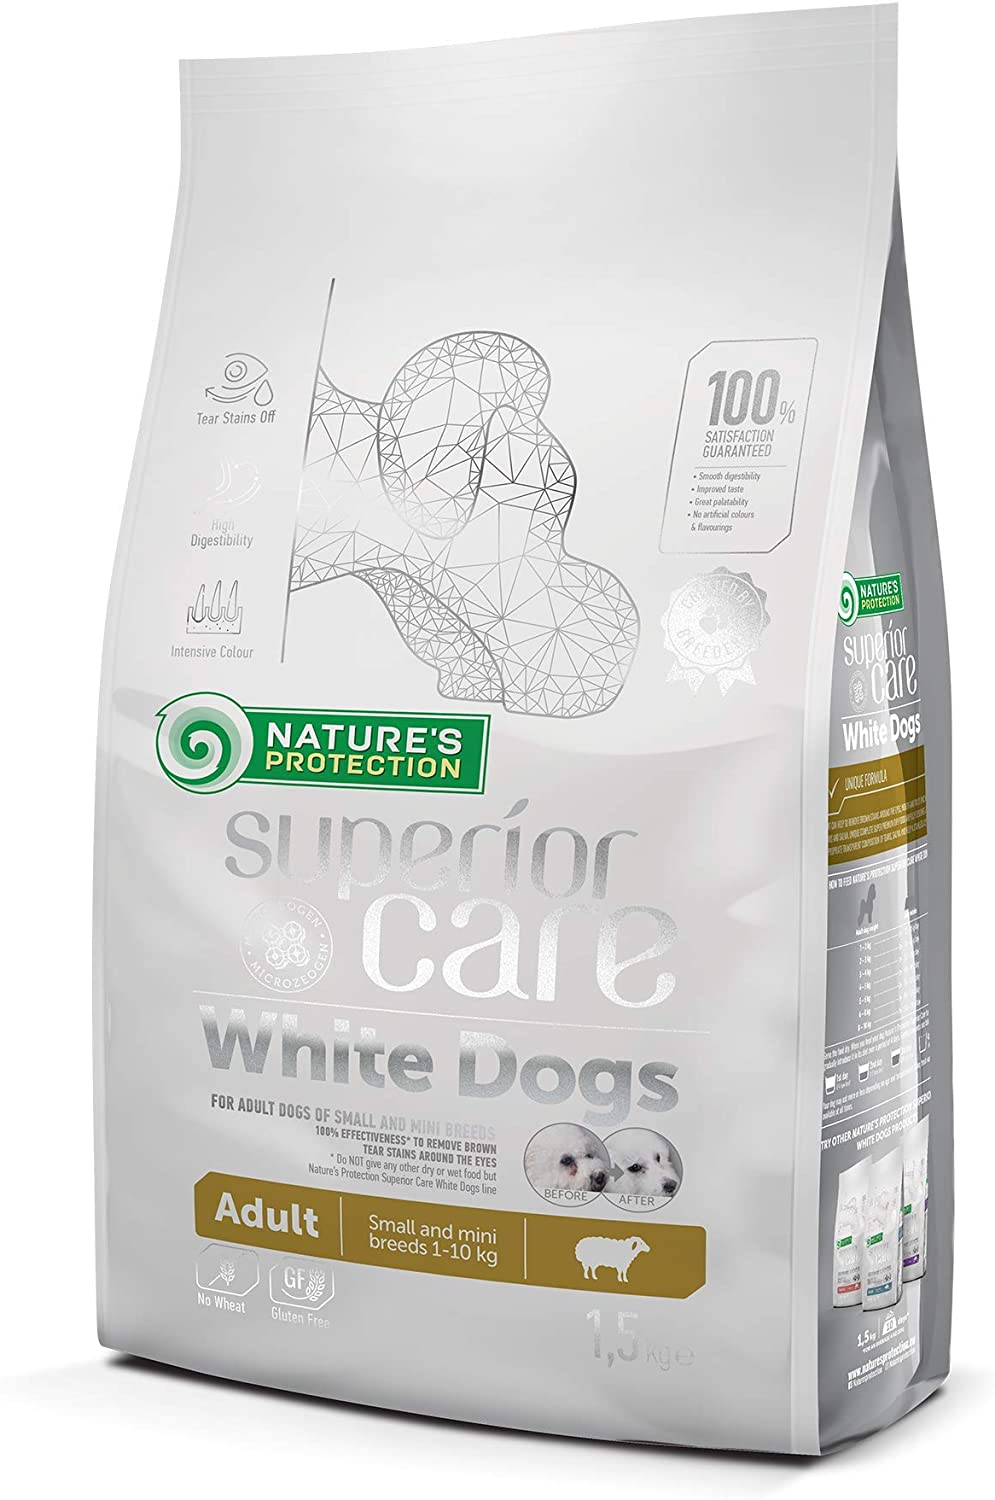 NATURE'S PROTECTION SUPERIOR CARE - WHITE DOGS ADULT SMALL AND MINI BREEDS GRAIN FREE LAMB DRY DOG FOOD (1.5kg)